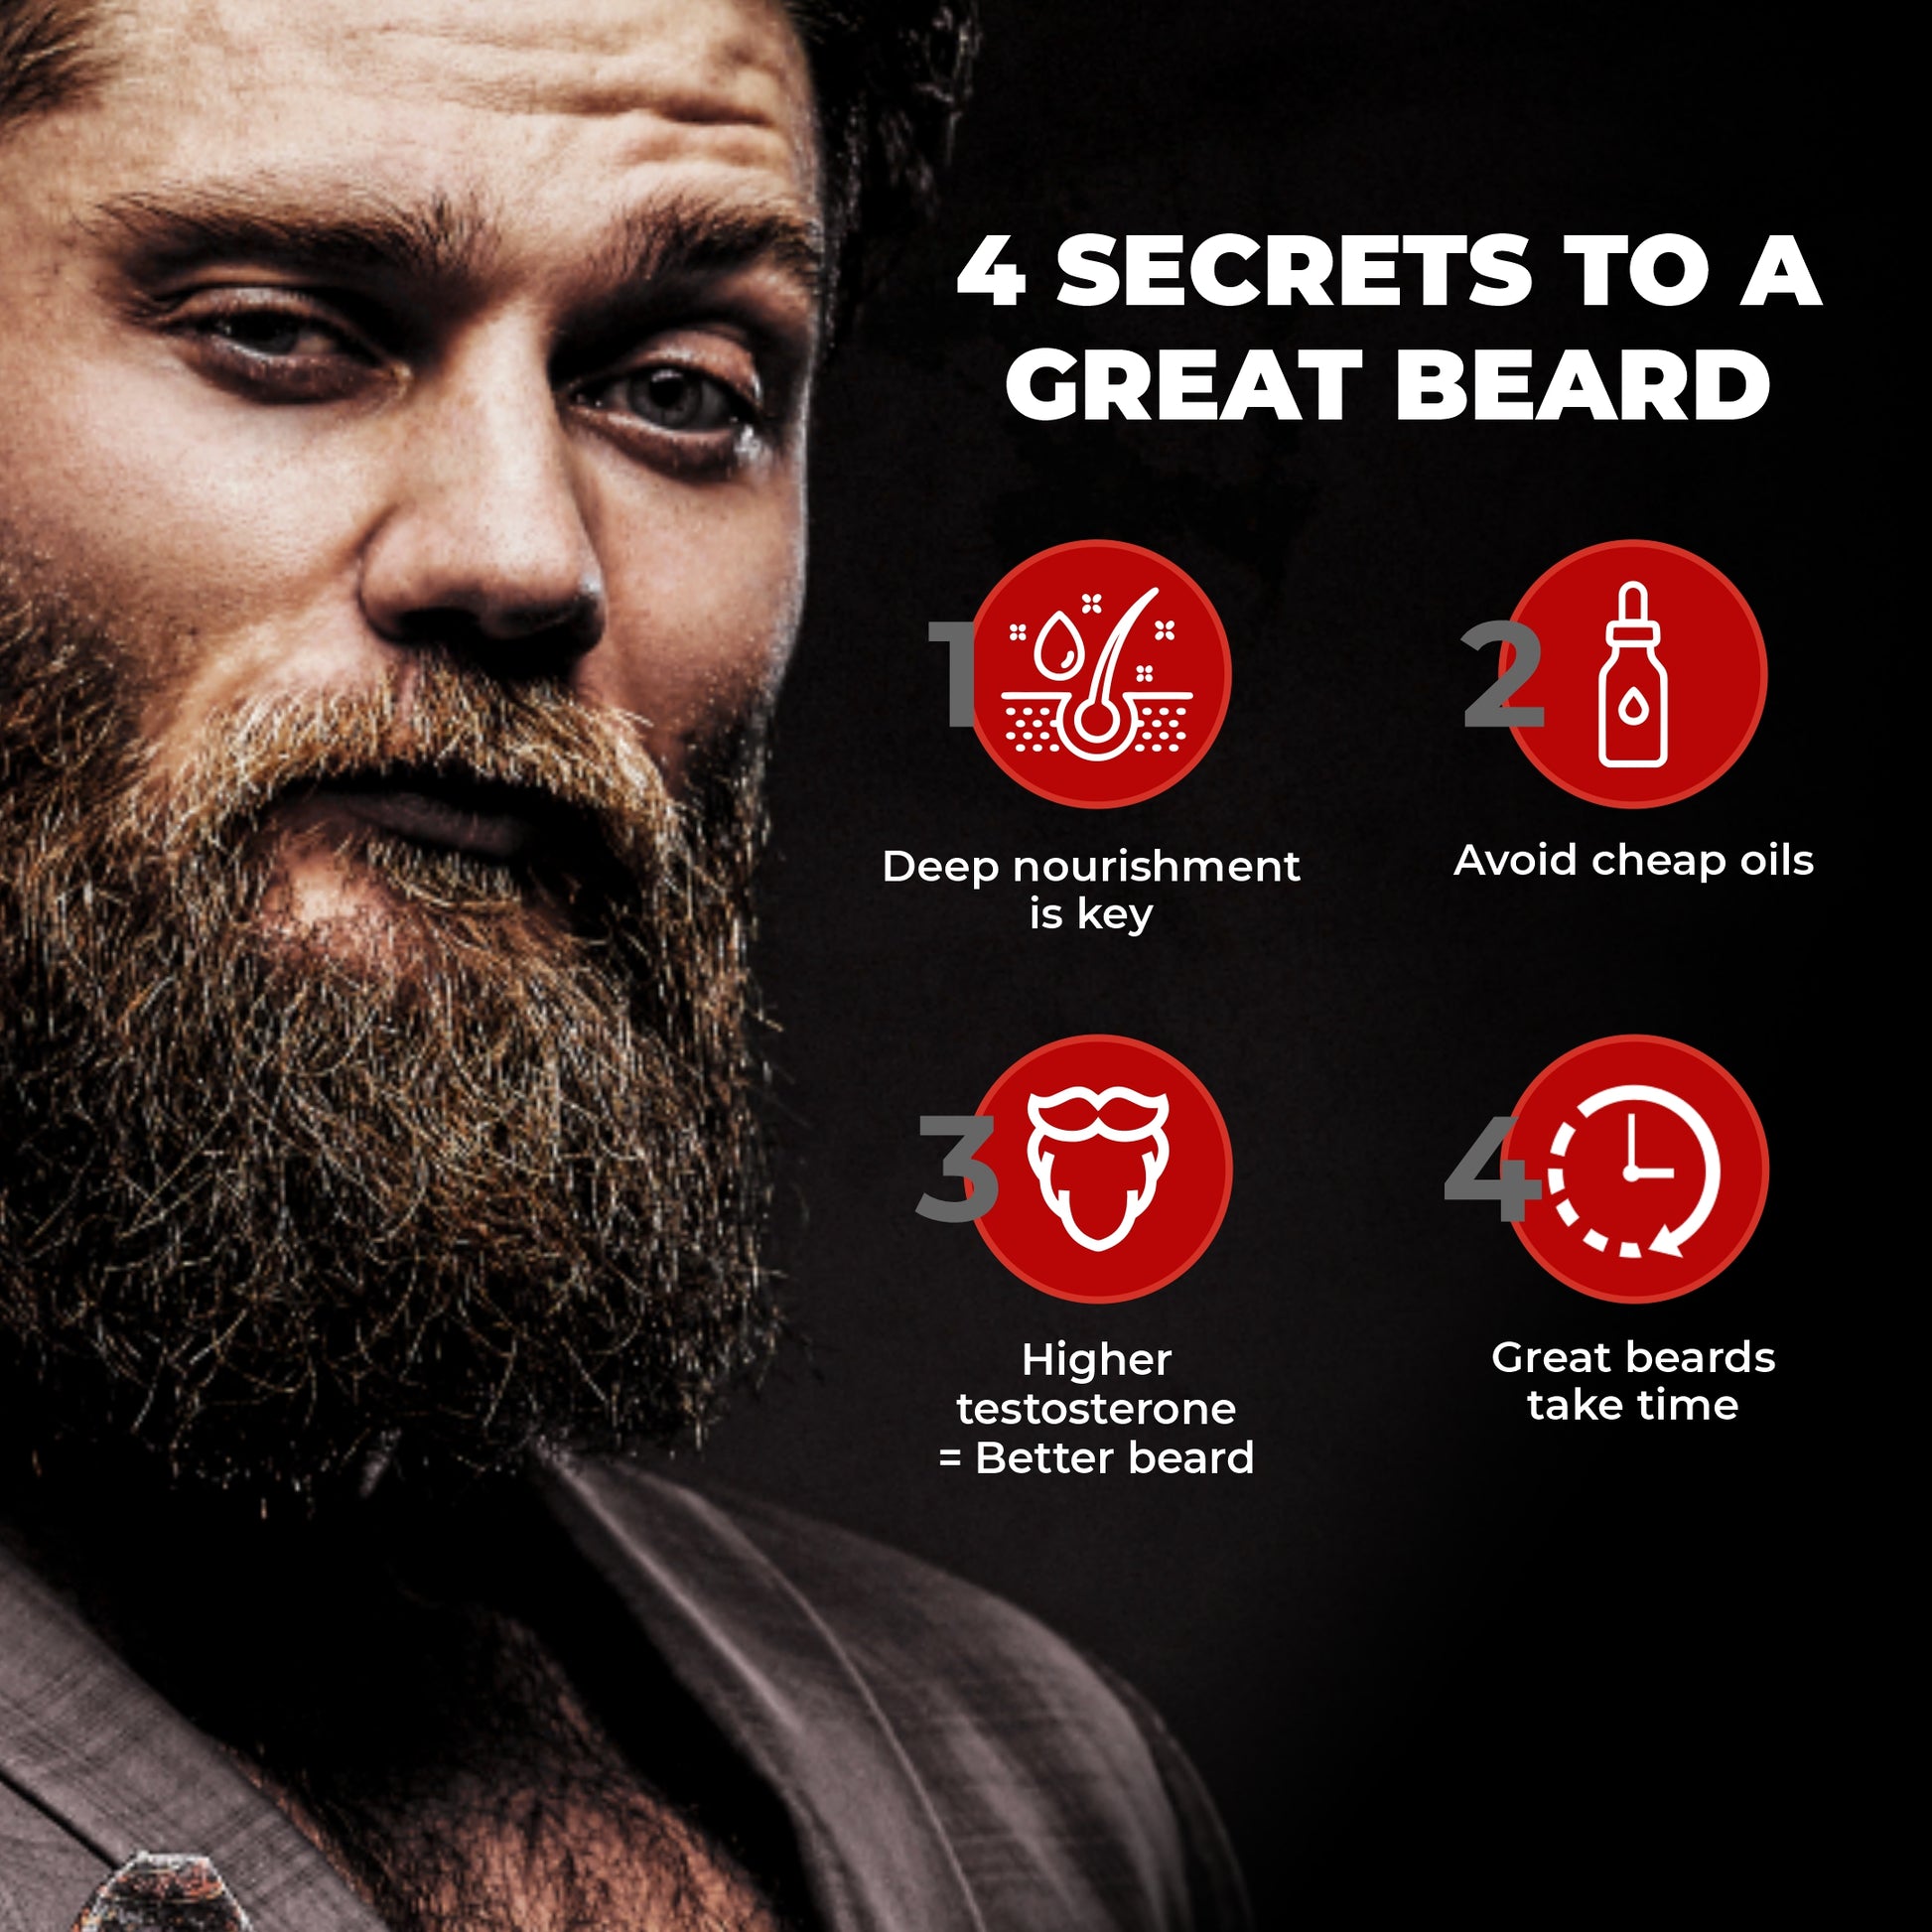 secrest to a great beard, Does Beardo increase beard growth? Which oil combination is best for beard growth? How long does Beardo take to grow a beard? How can I grow my beard 10x faster? How much beard grows in 5 days? How long will my beard grow in 1 week?